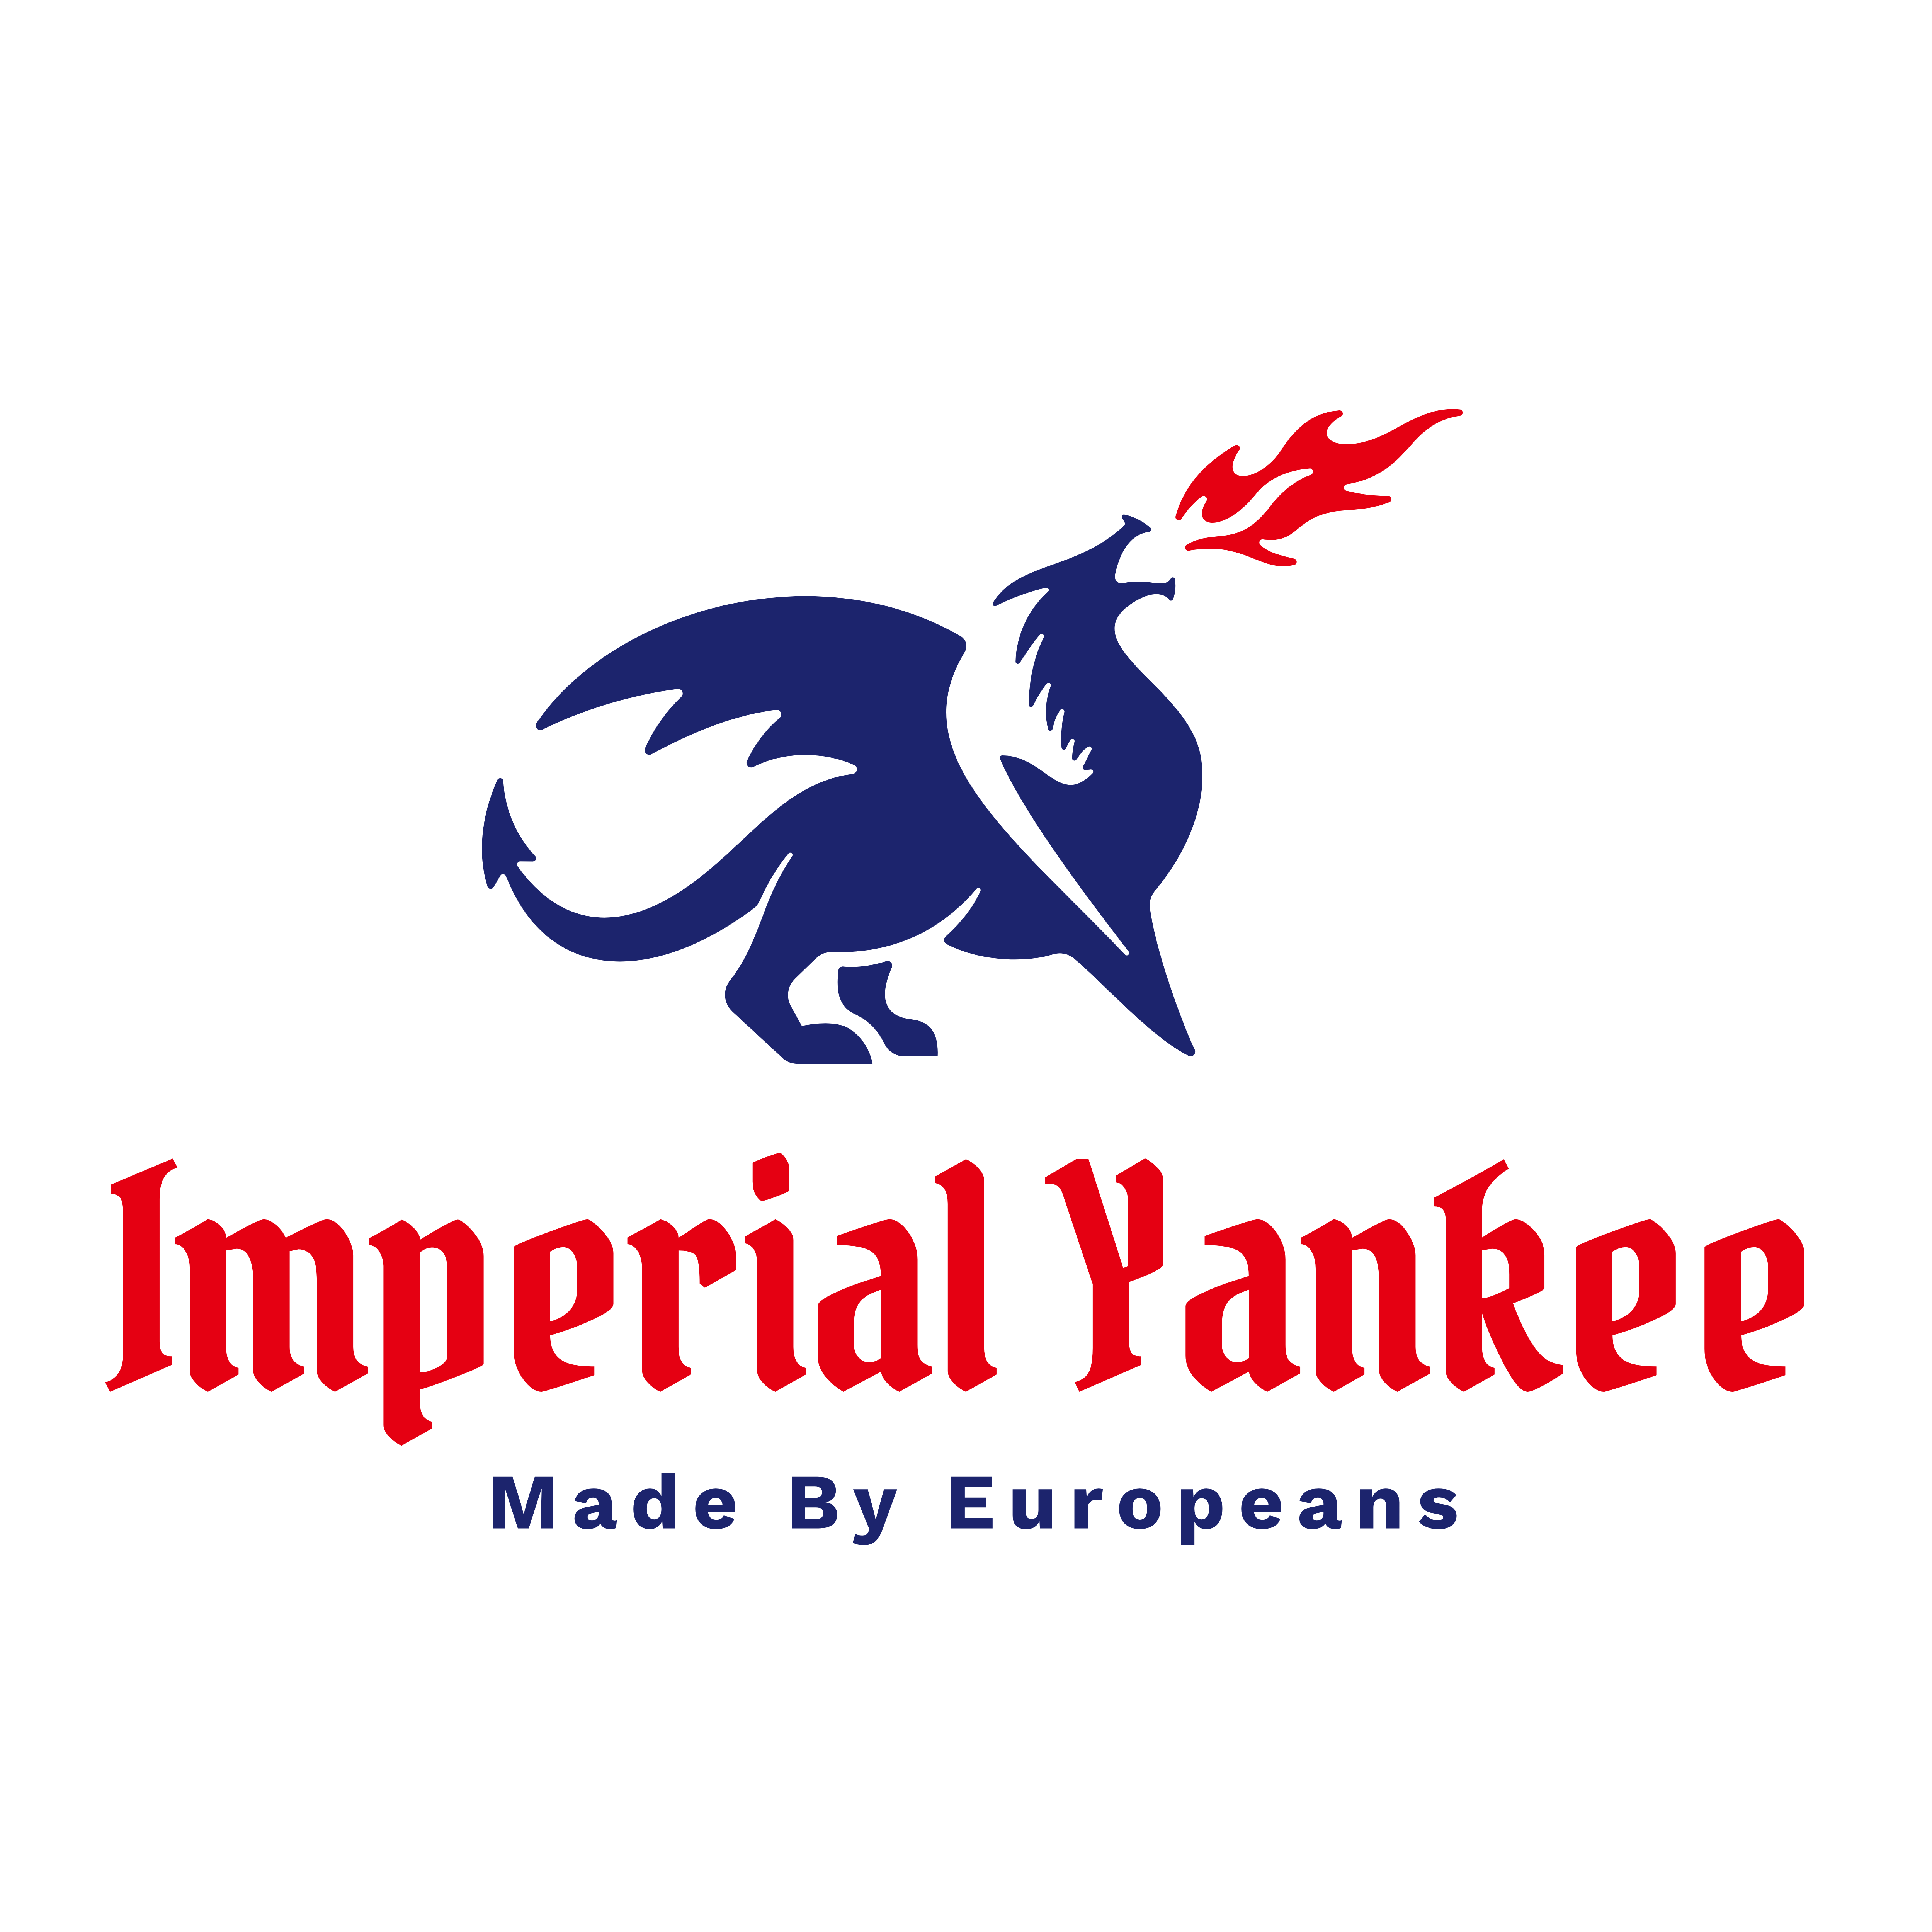 Imperial Yankee made by Europeans